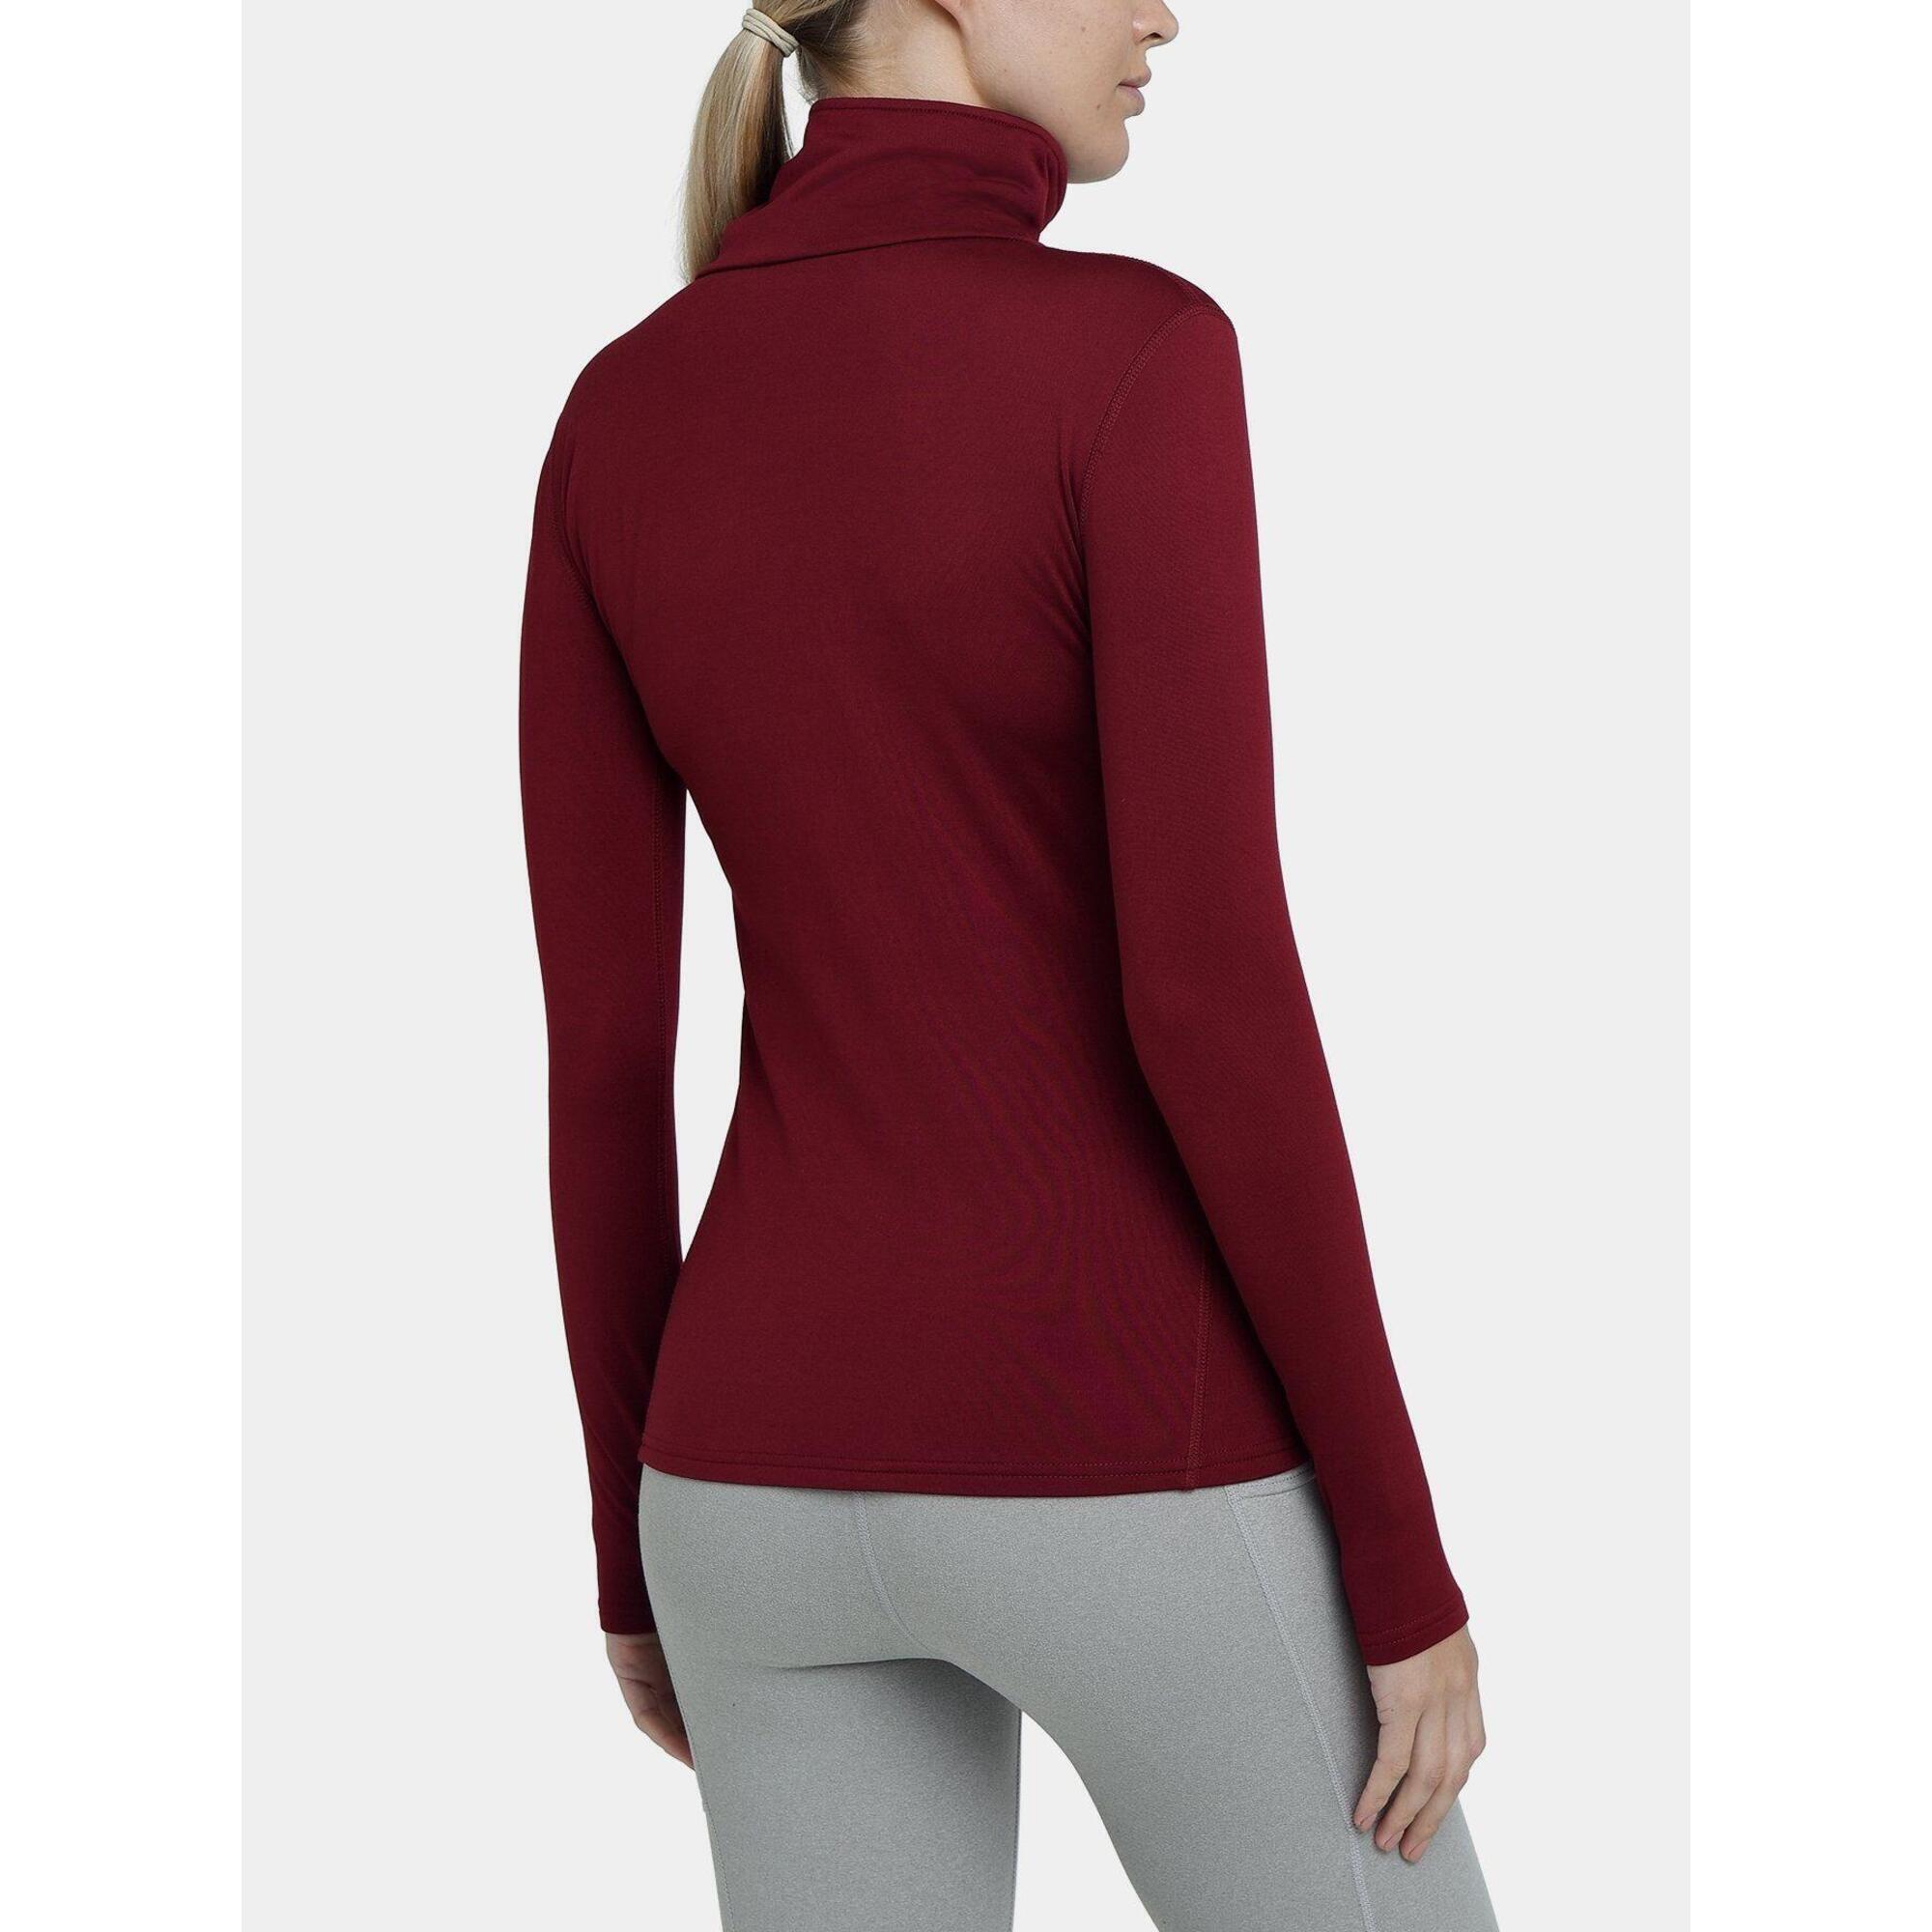 Women's Thermal Funnel Neck Top - Cabernet 2/5